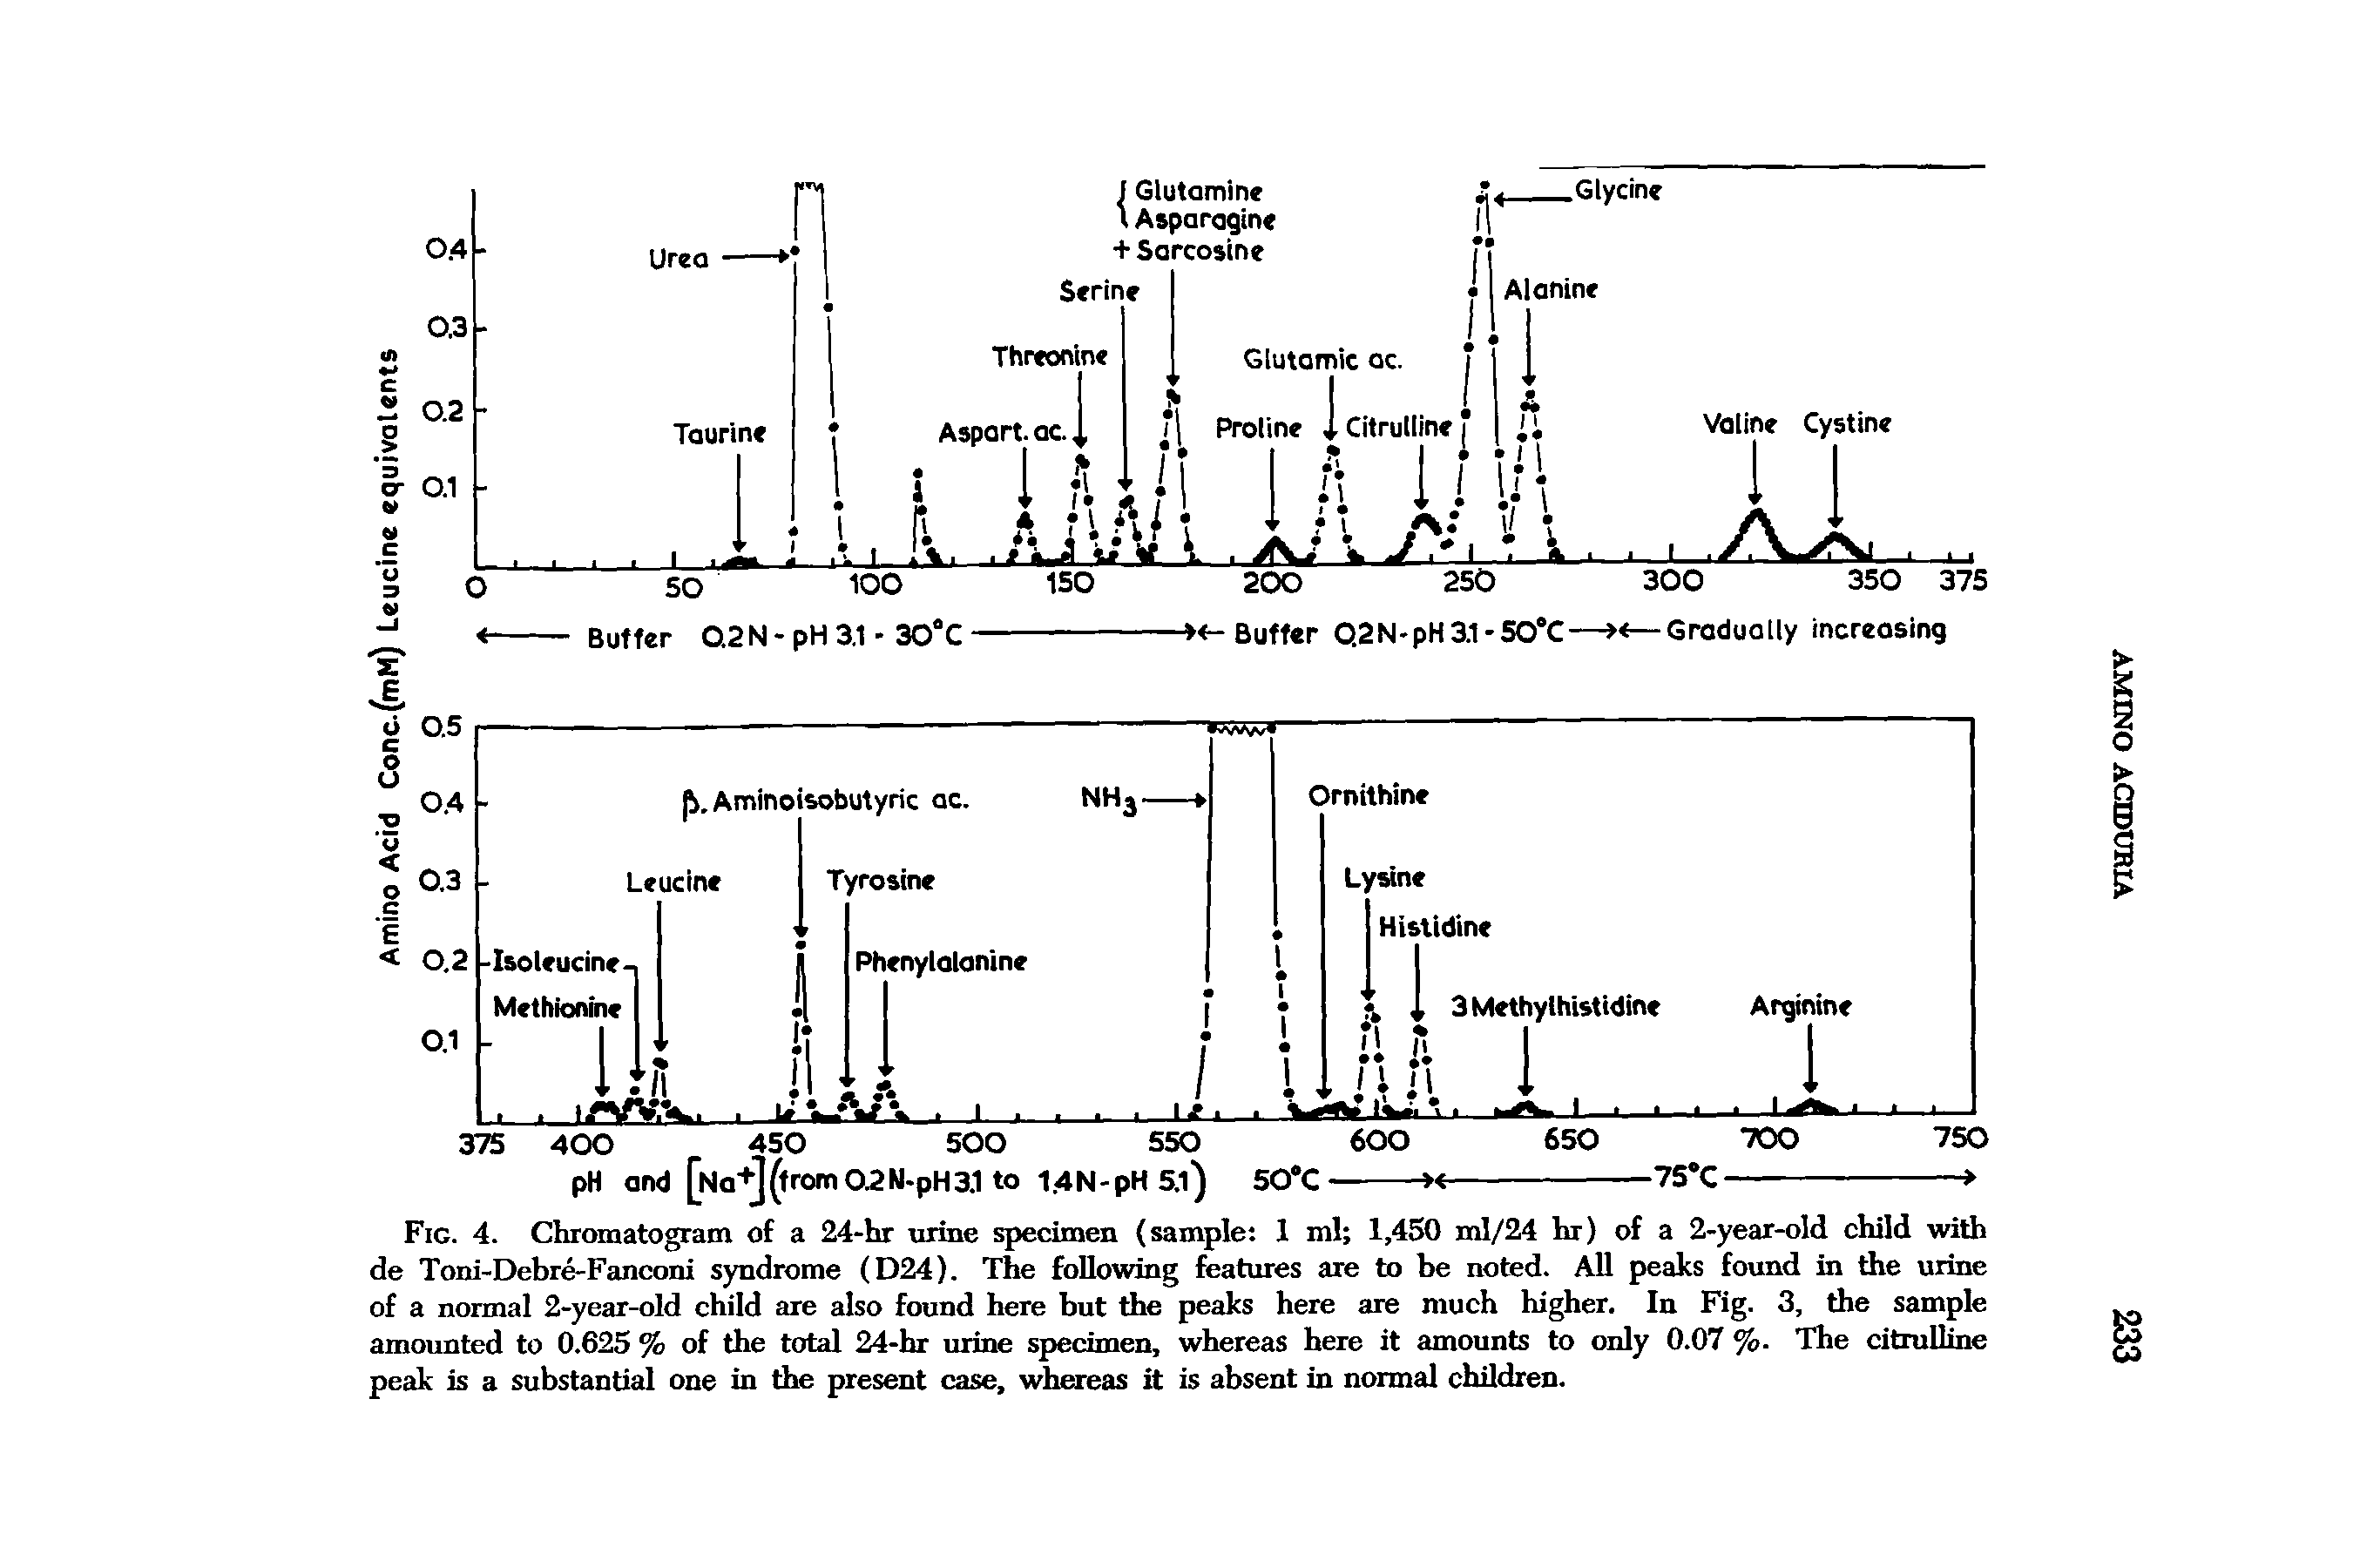 Fig. 4. Chromatogram of a 24-hr urine specimen (sample 1 ml 1,450 ml/24 hr) of a 2-year-old child with de Toni-Debre-Fanconi syndrome (D24). The following features are to be noted. All peaks found in the urine of a normal 2-year-old child are also found here but the peaks here are much higher. In Fig. 3, the sample amounted to 0.625 % of the total 24-hr urine specimen, whereas here it amounts to only 0.07 %. The citrulline peak is a substantial one in the present case, whereas it is absent in normal children.